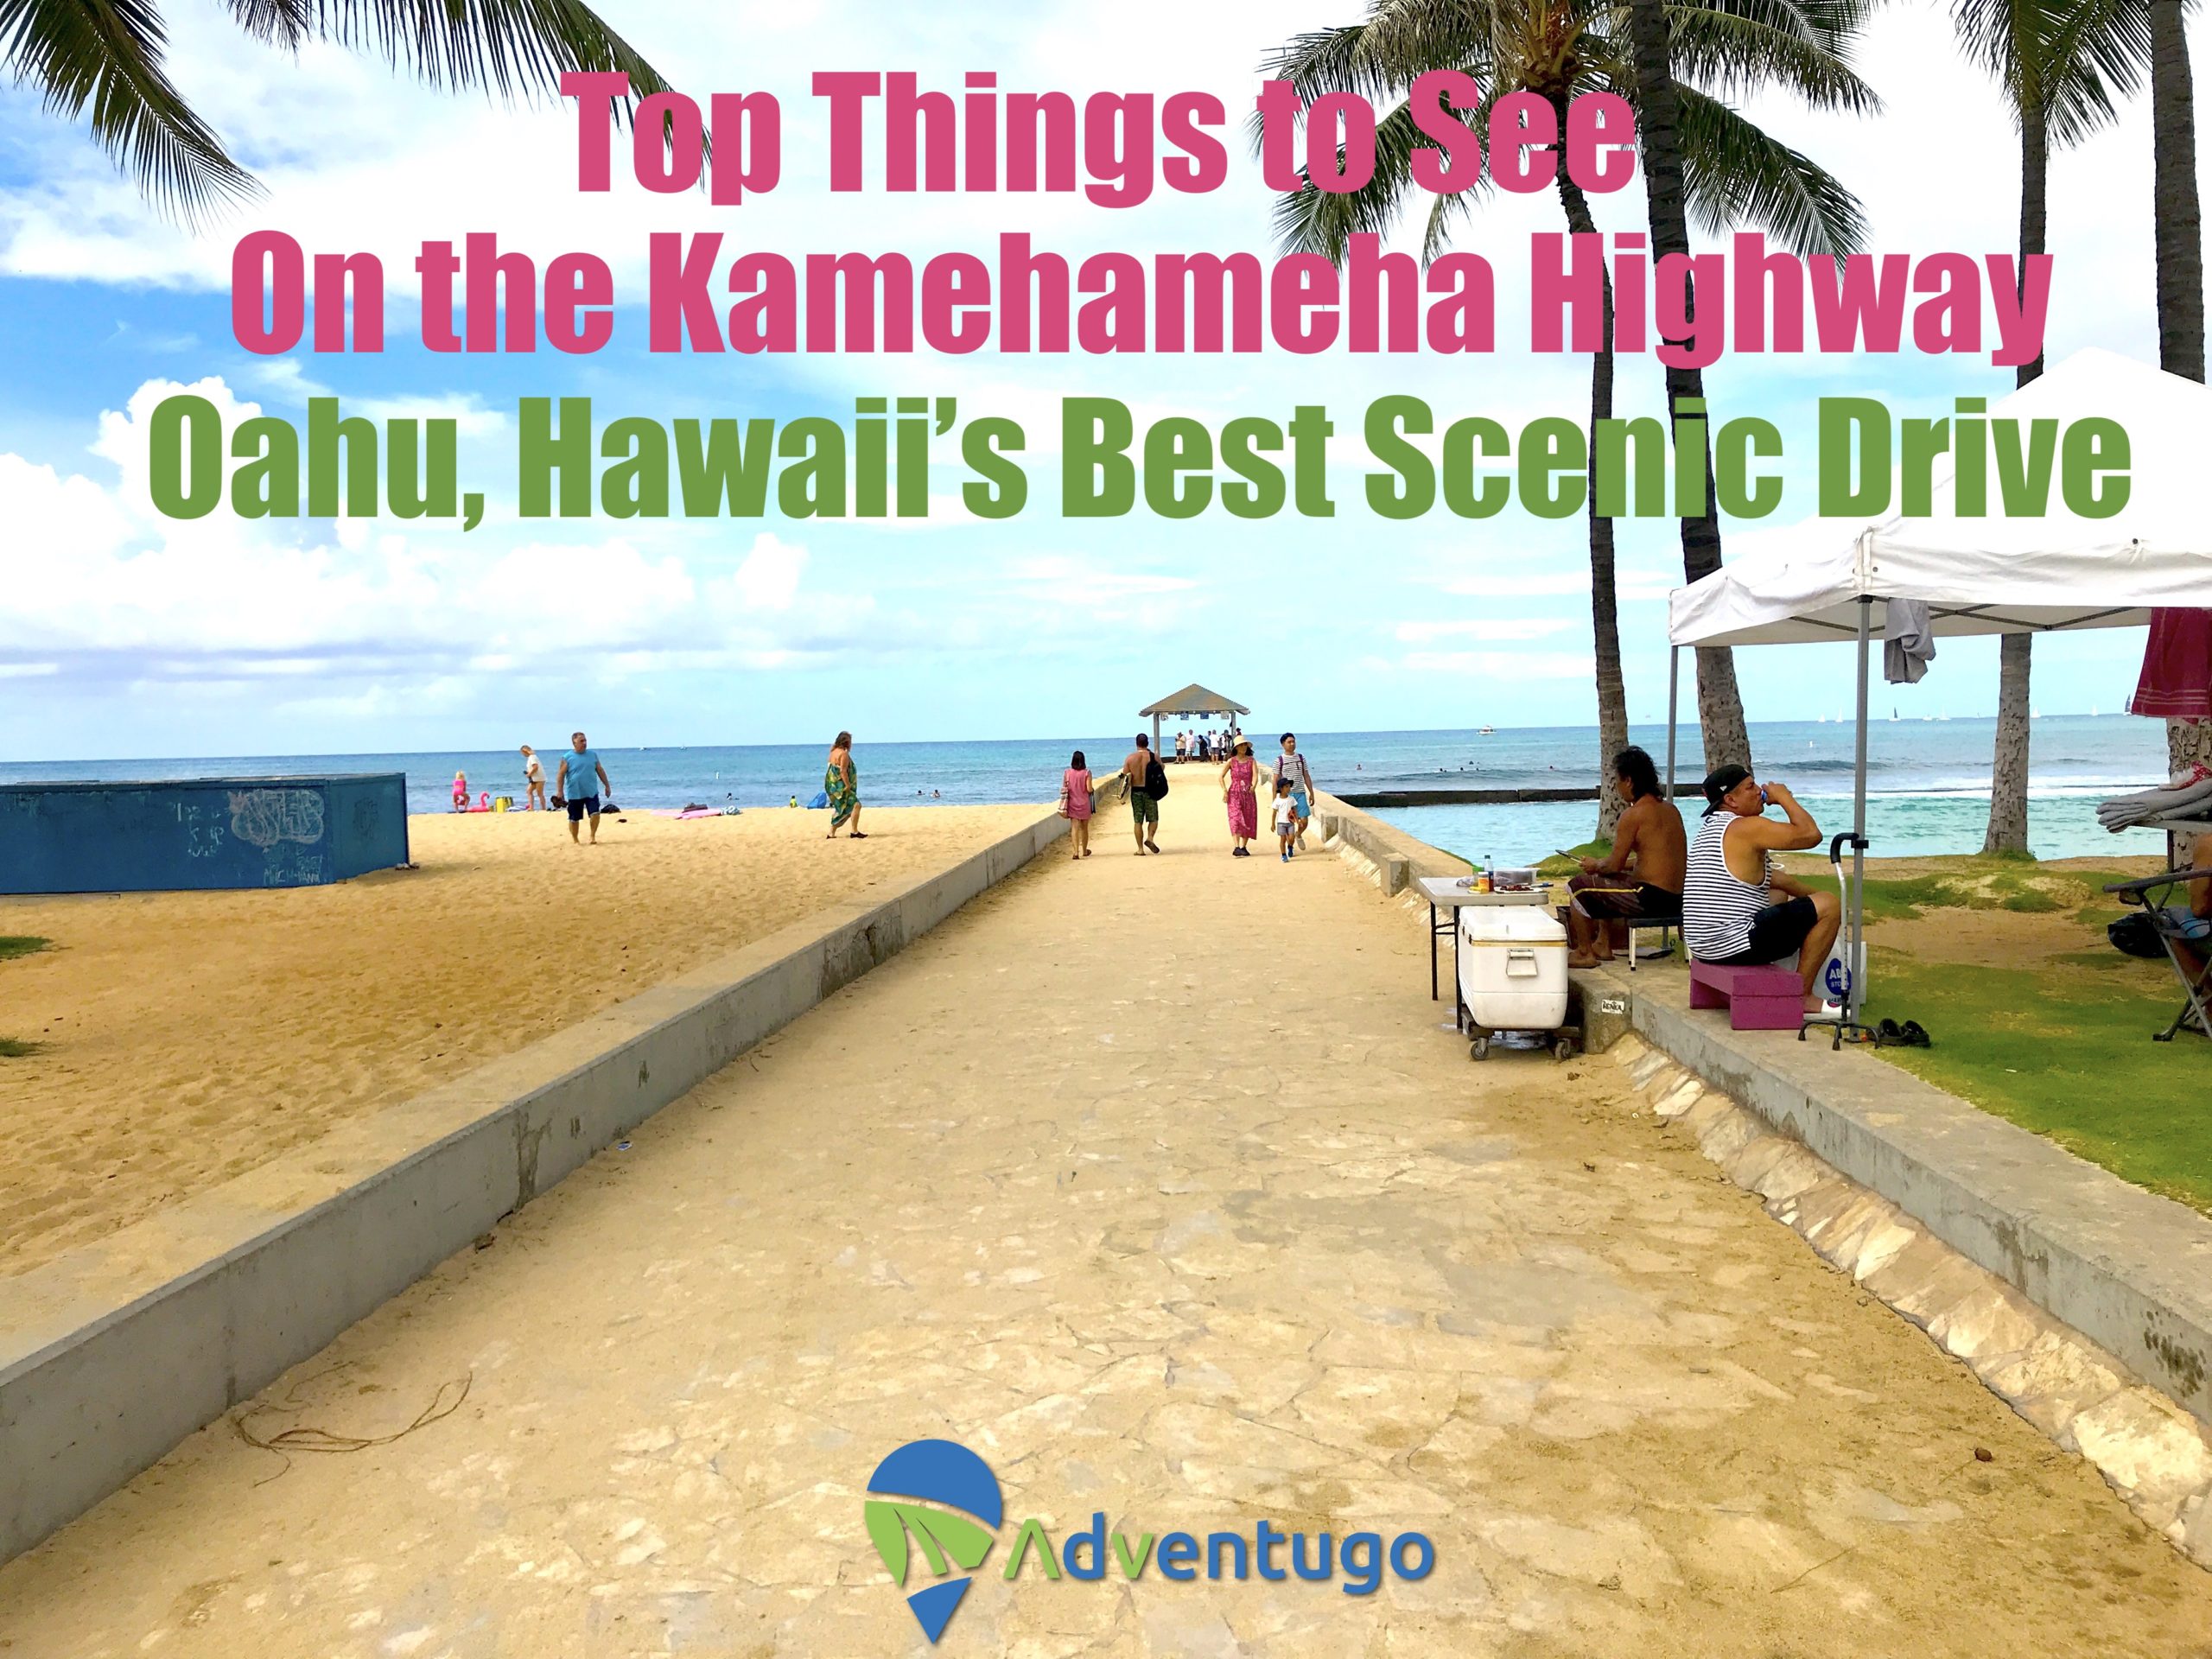 Top things to do and see on the Kamehameha Highway. Oahu's best scenic drive